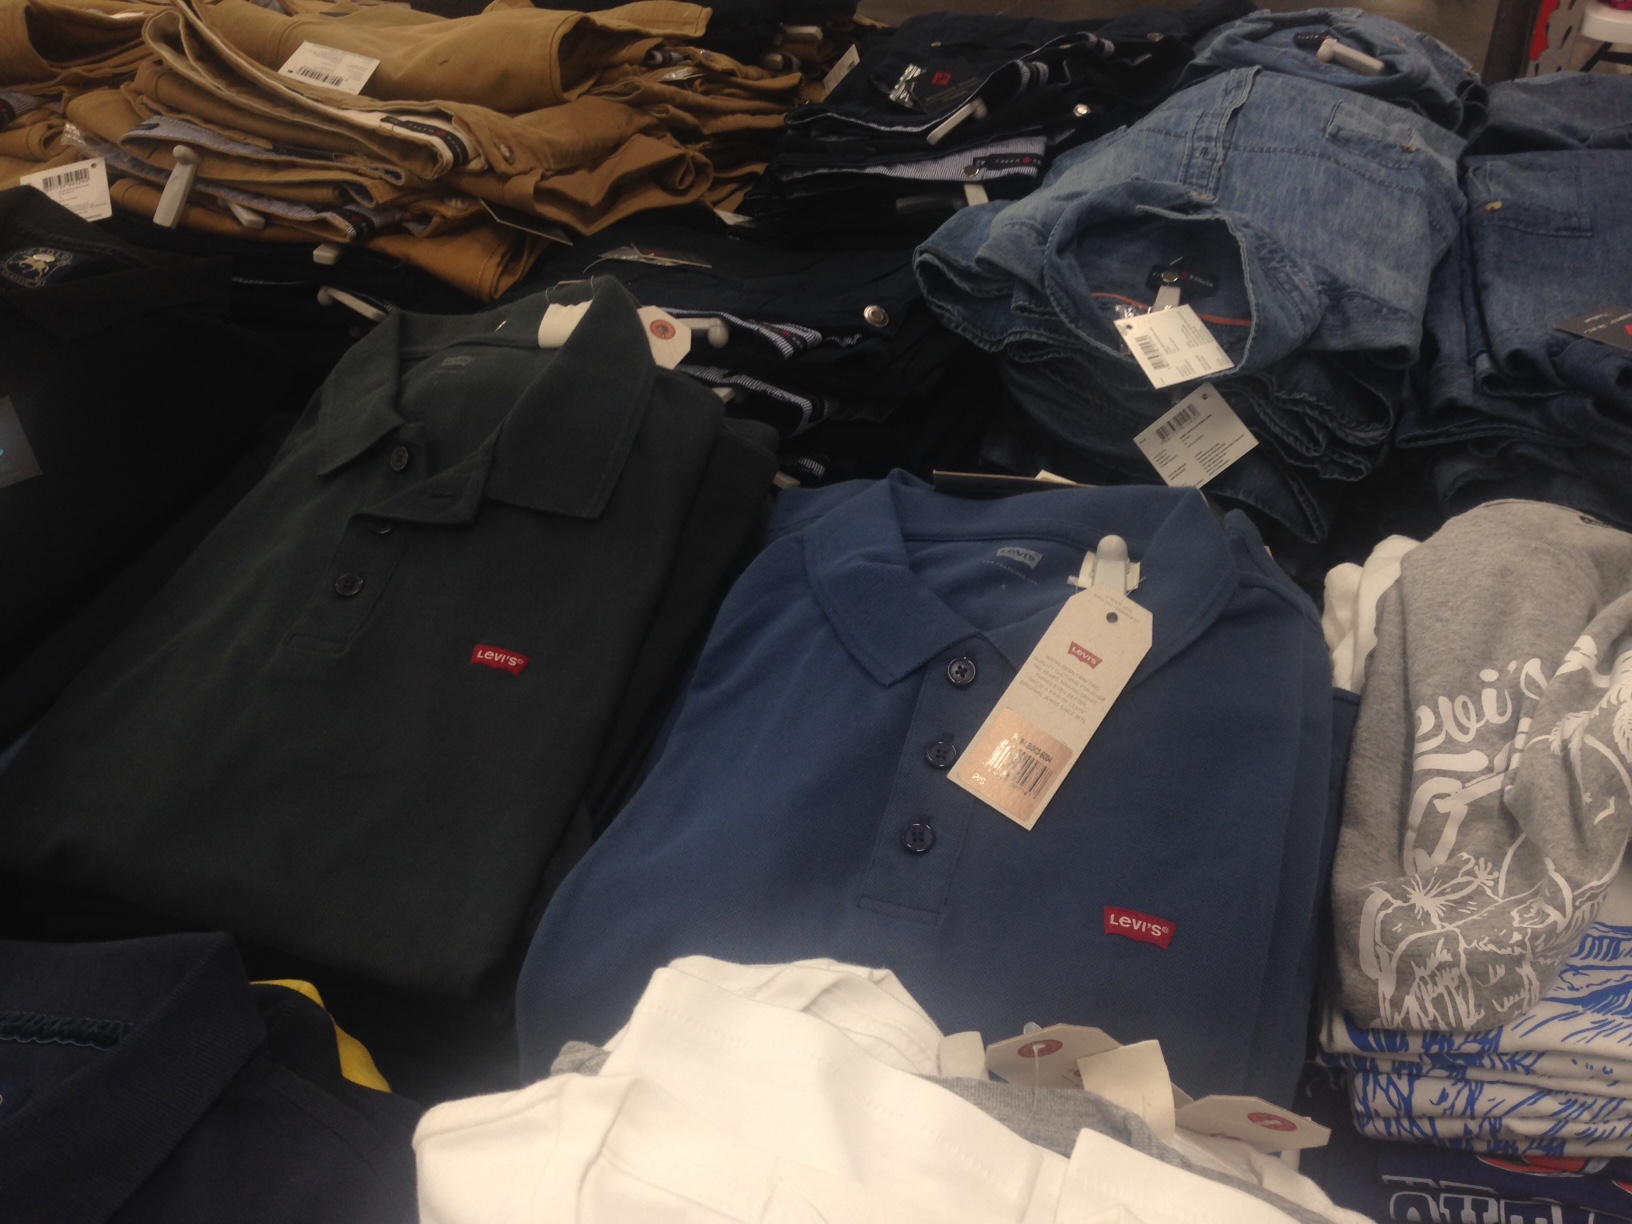 's club levis , Off 63%,